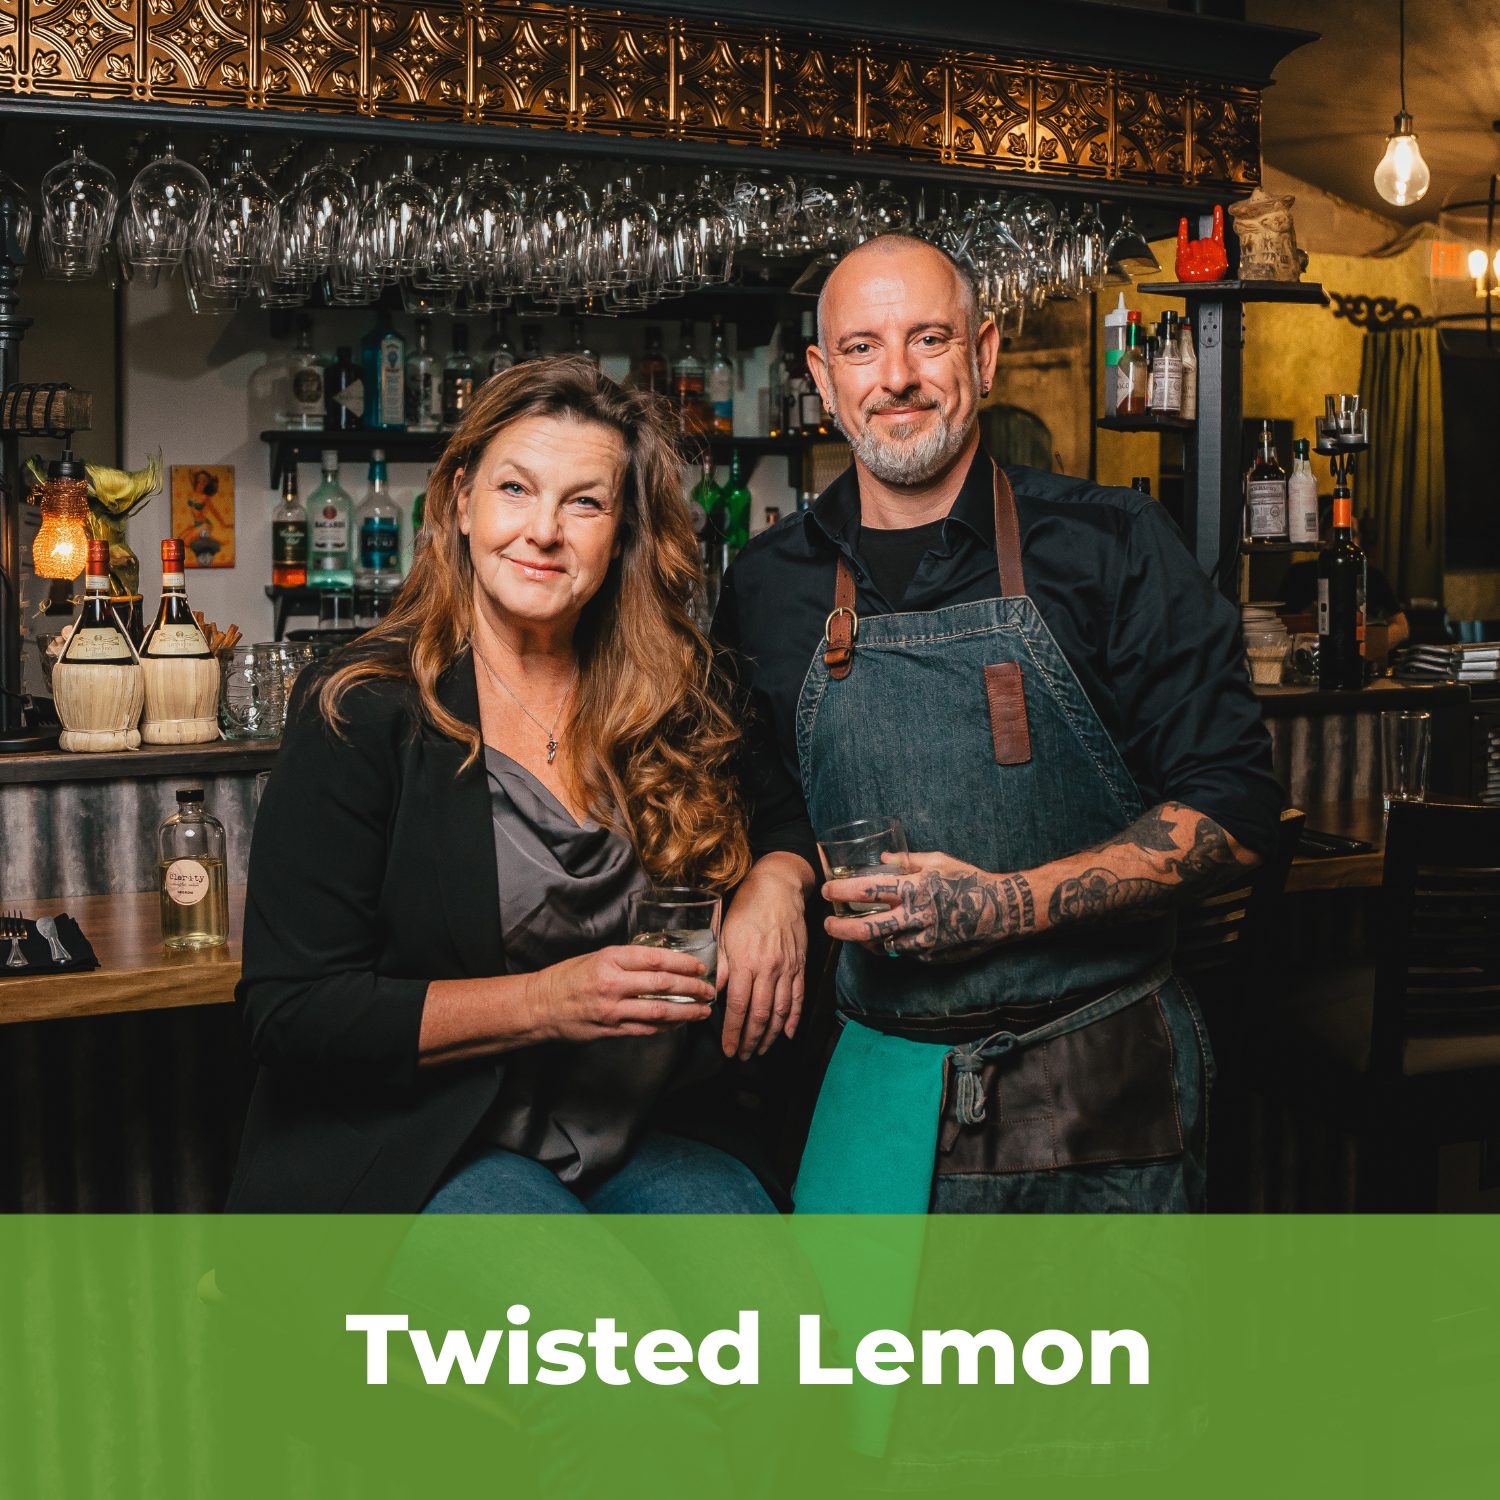 Owners of Twisted Lemon standing in a dark room in front of a bar